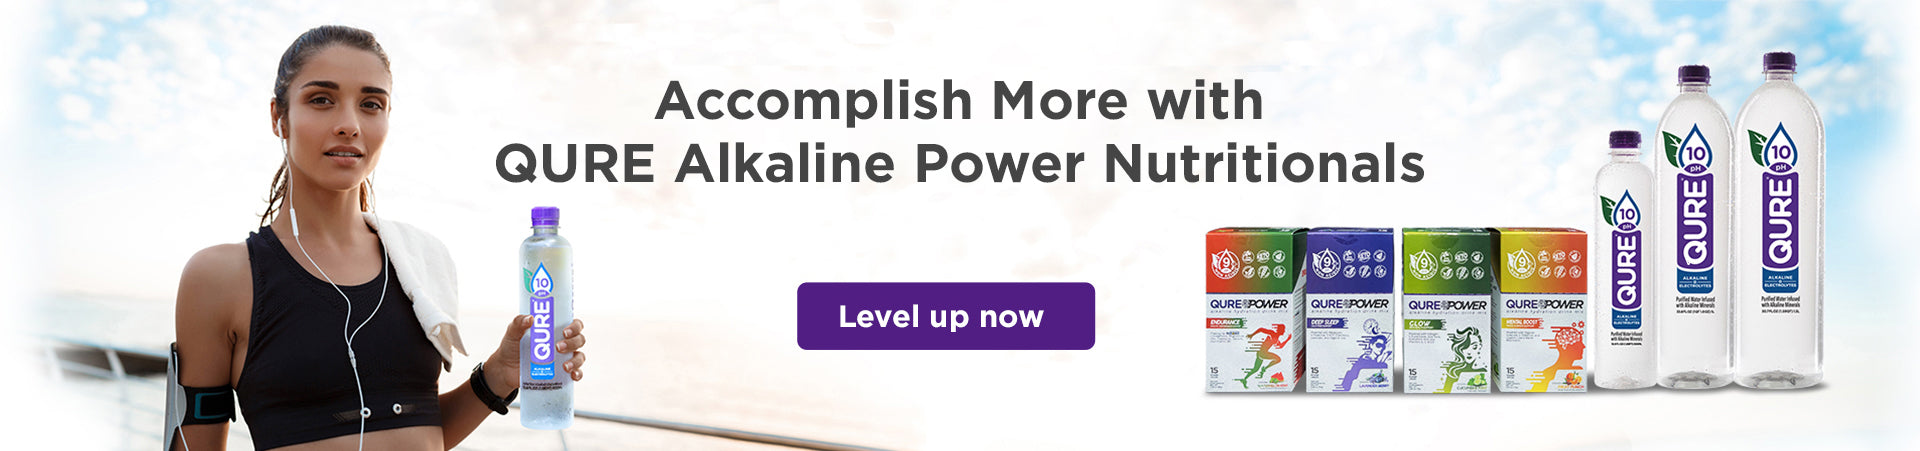 accomplish more with qure alkaline nutritionals